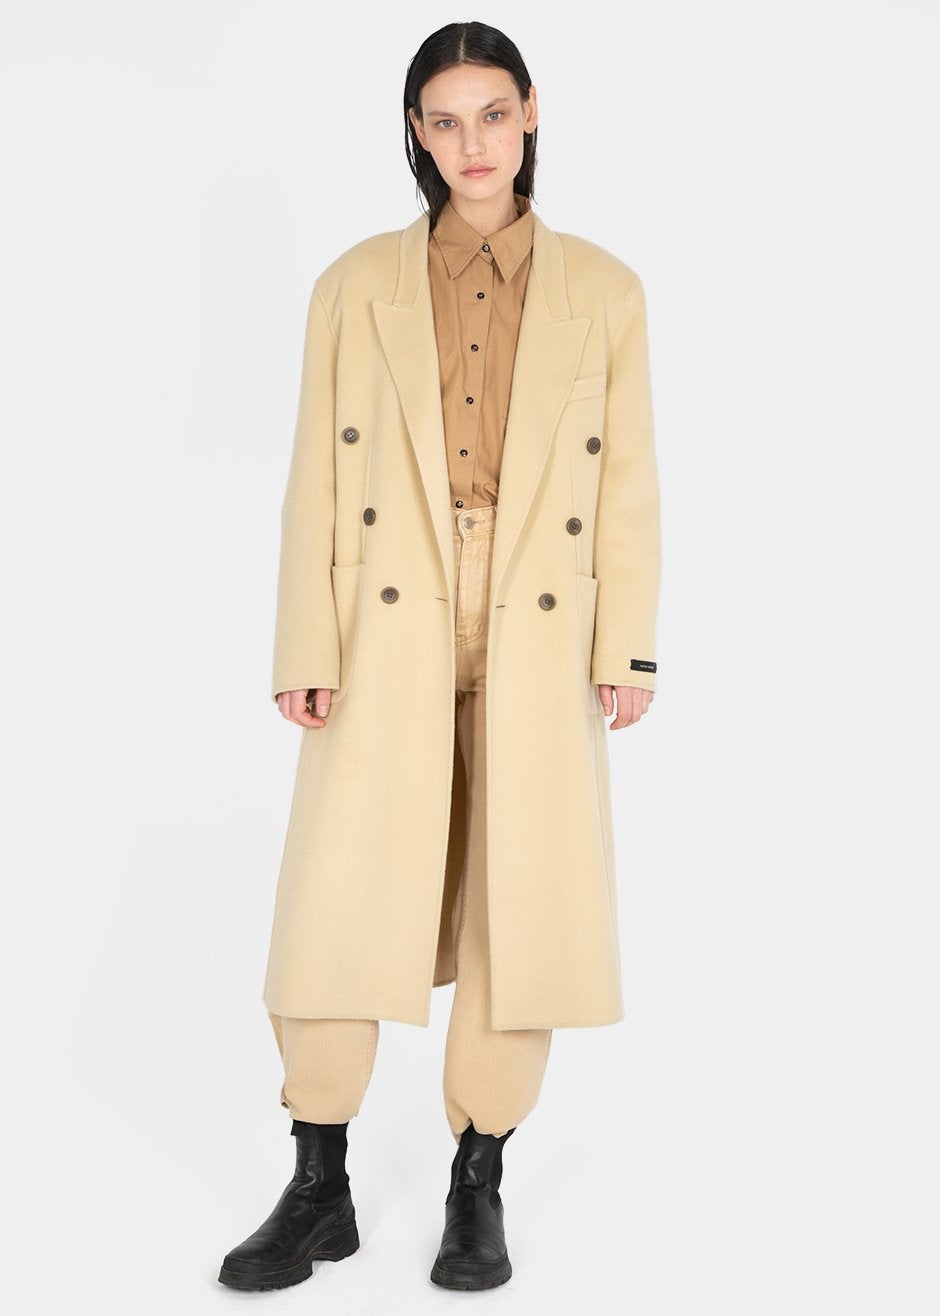 The Frankie Shop + Padded Shoulder Double Breasted Topcoat